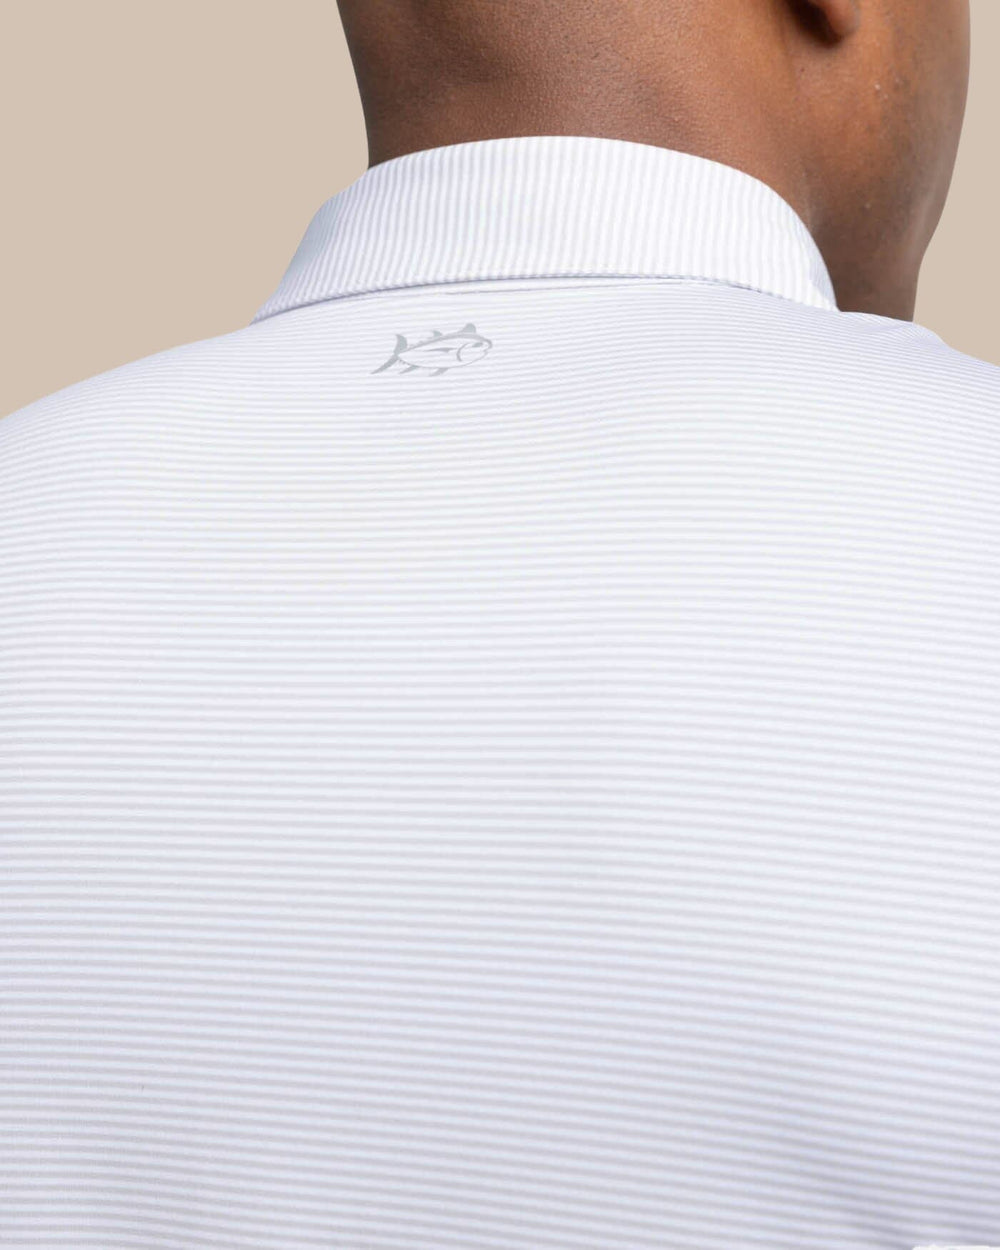 The detail view of the Southern Tide brrr-eeze Meadowbrook Stripe Polo by Southern Tide - Platinum Grey